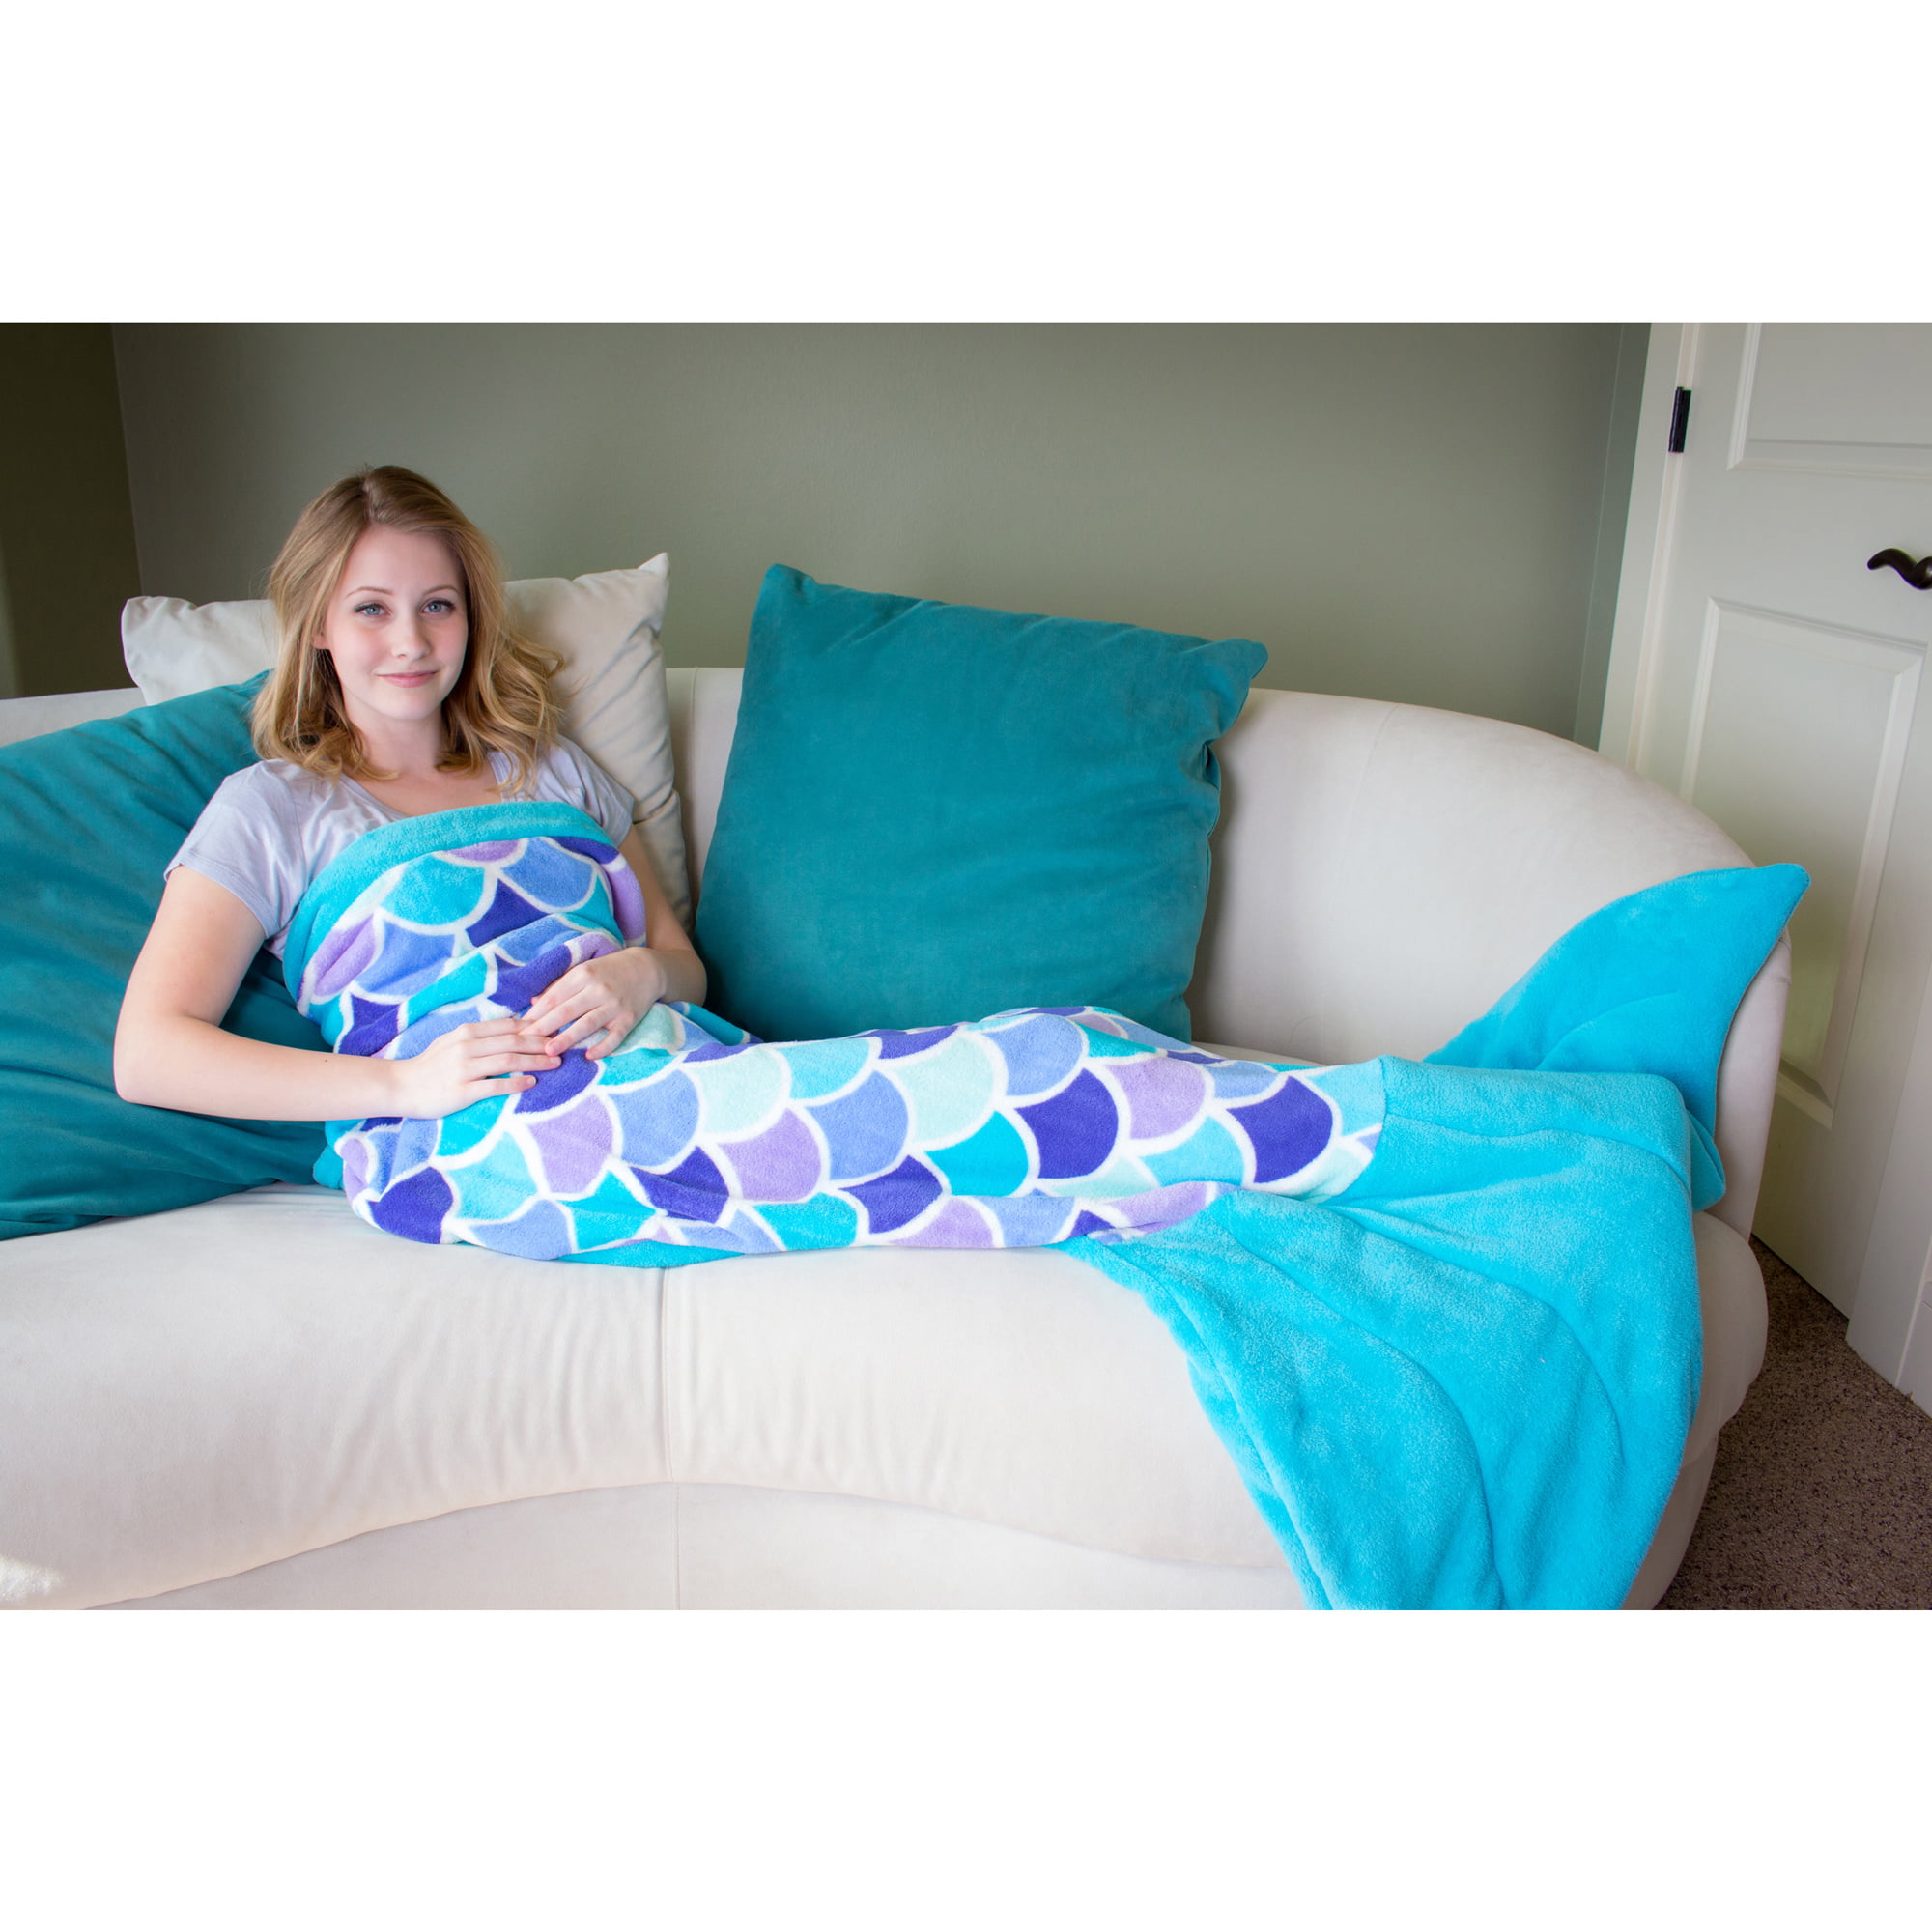 Mermaid Tail Blankets for Kids, Toddler and Adults from Fin Fun 